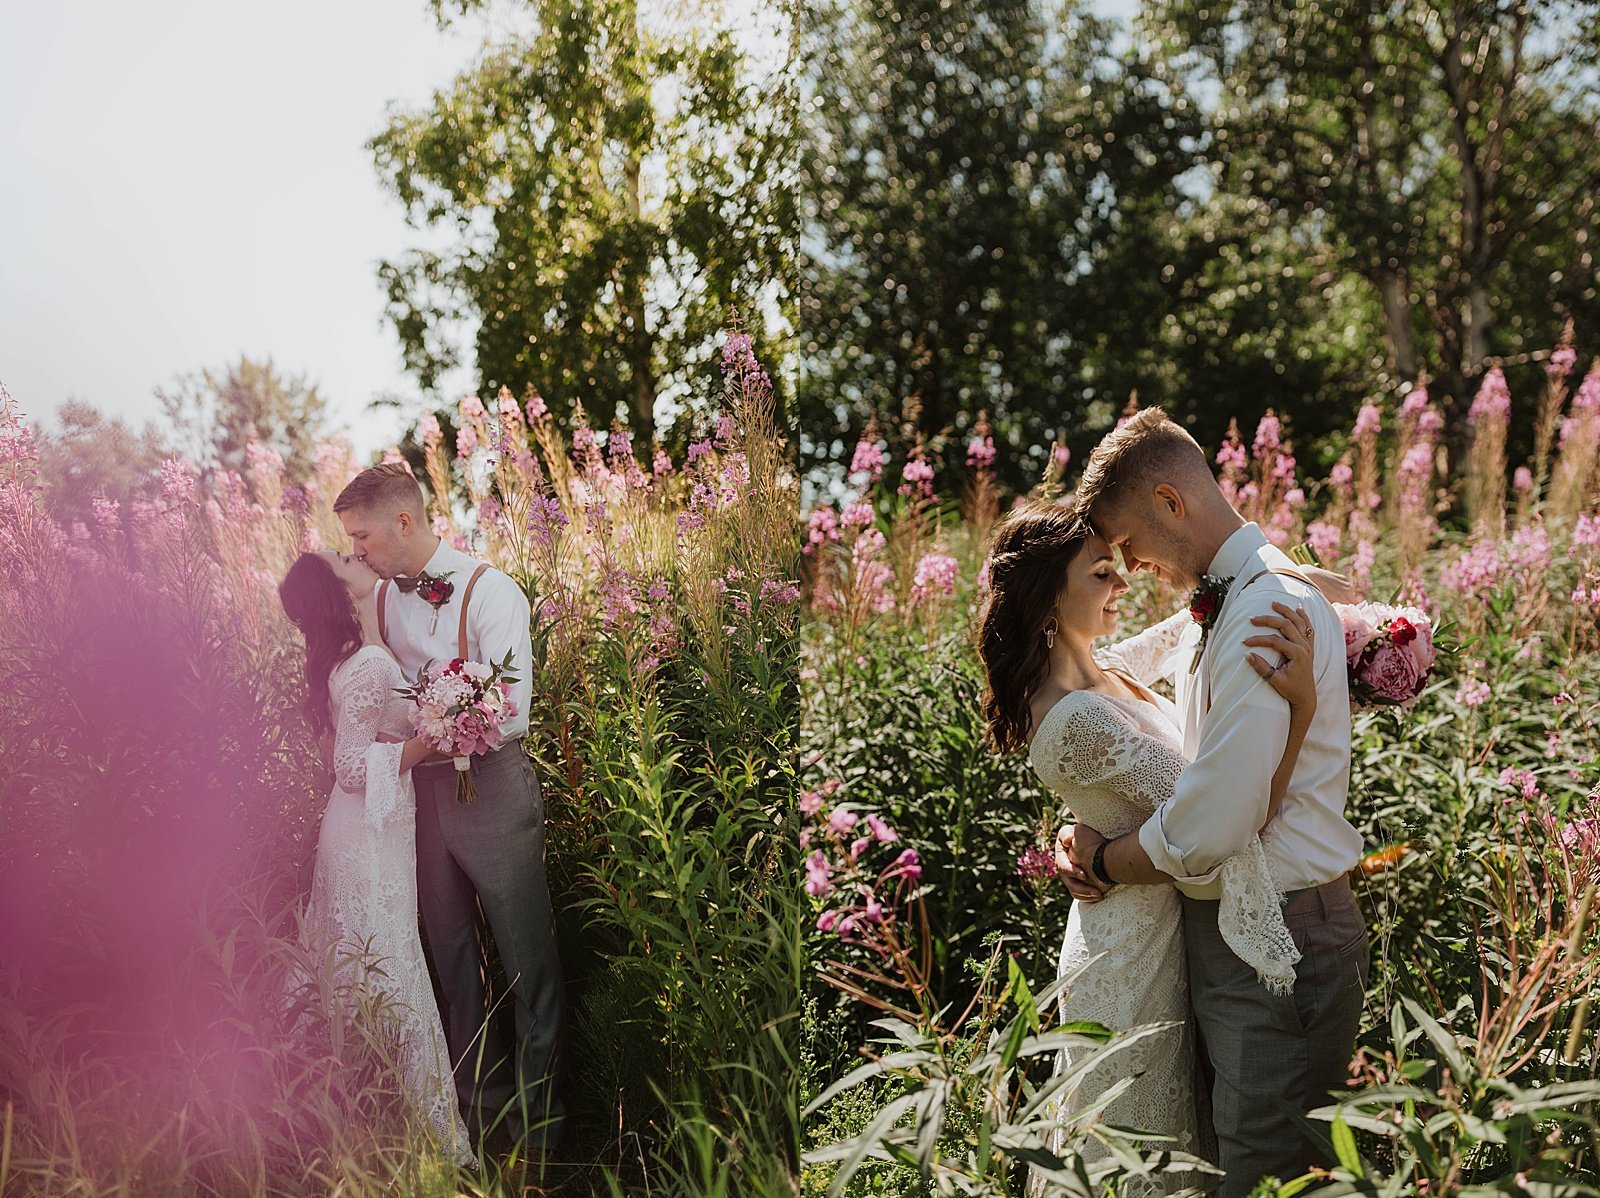  Bride and groom embracing after their outdoor wedding ceremony in Anchorage  